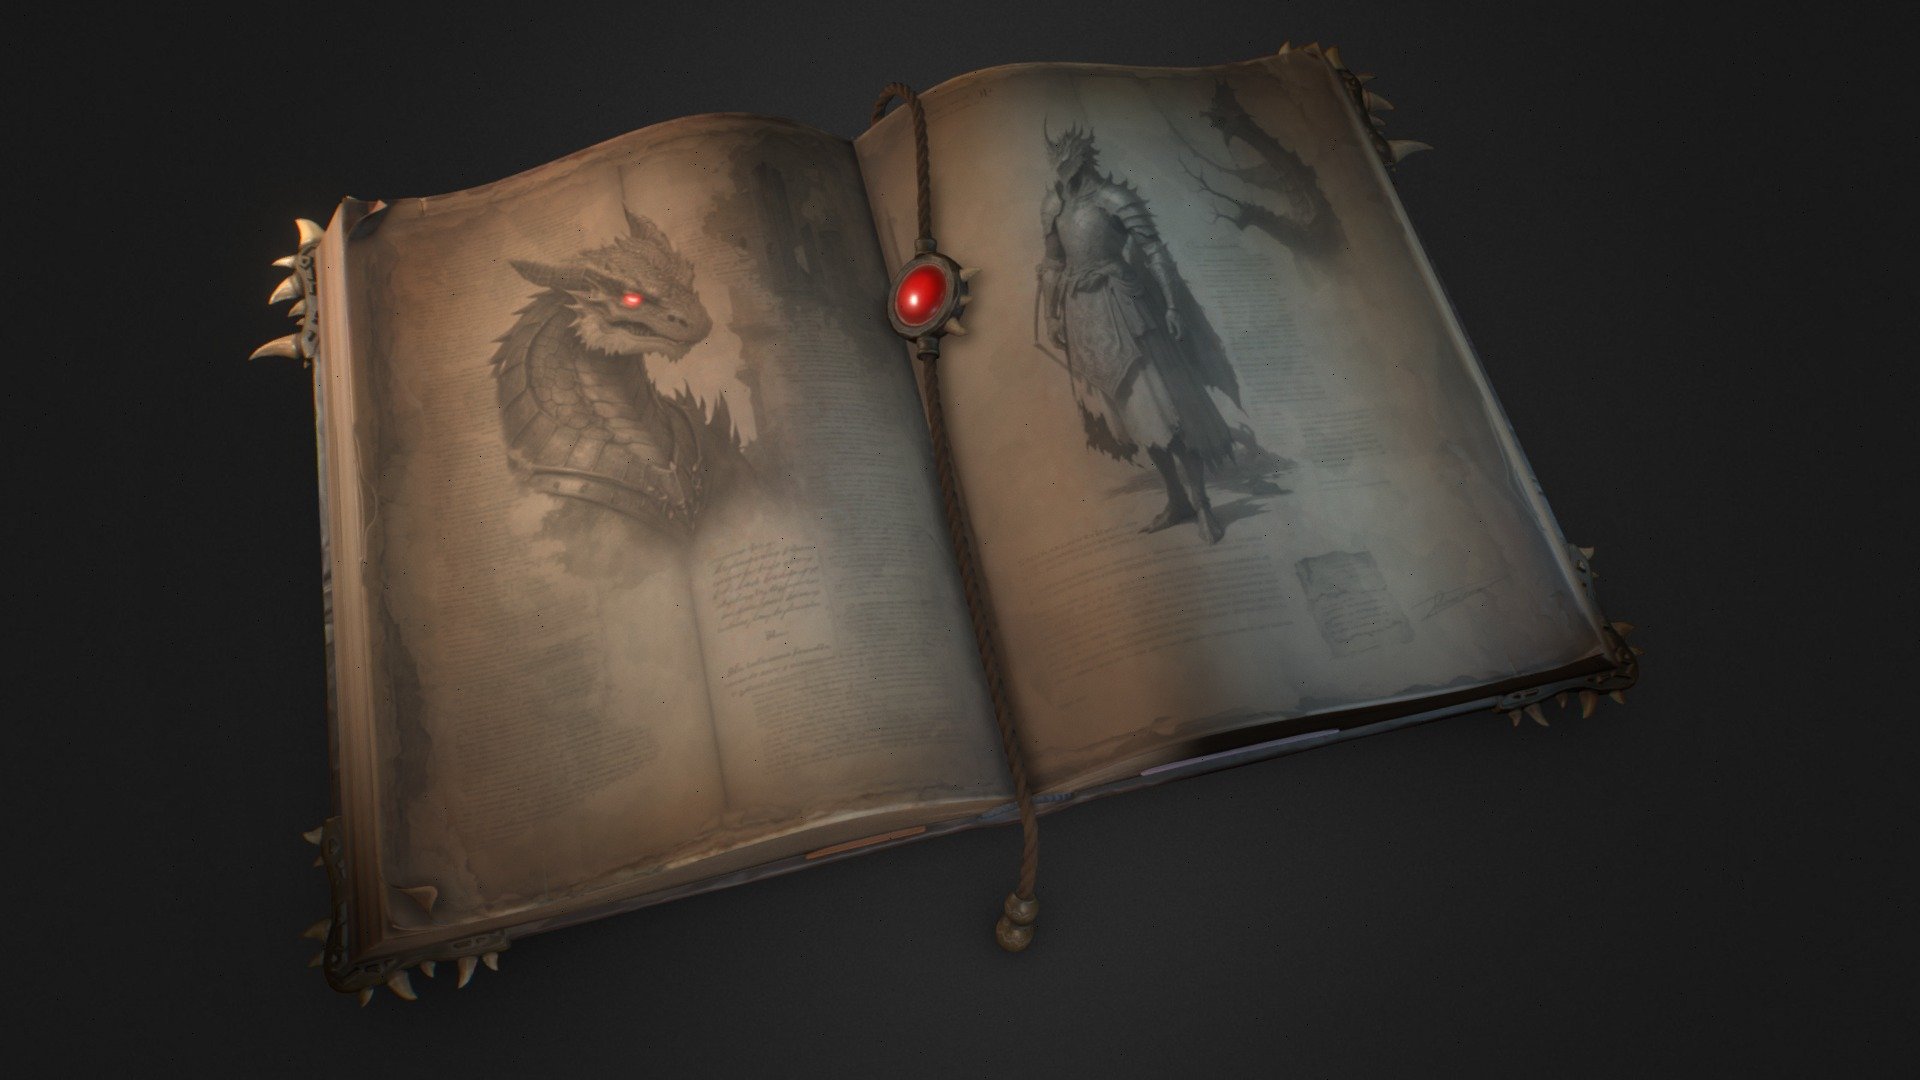 A fantasy book low poly model

4k textures. Polycount: 16735 tris.

Model created on Blender and ZBrush. Textured with Substance Painter 3d model